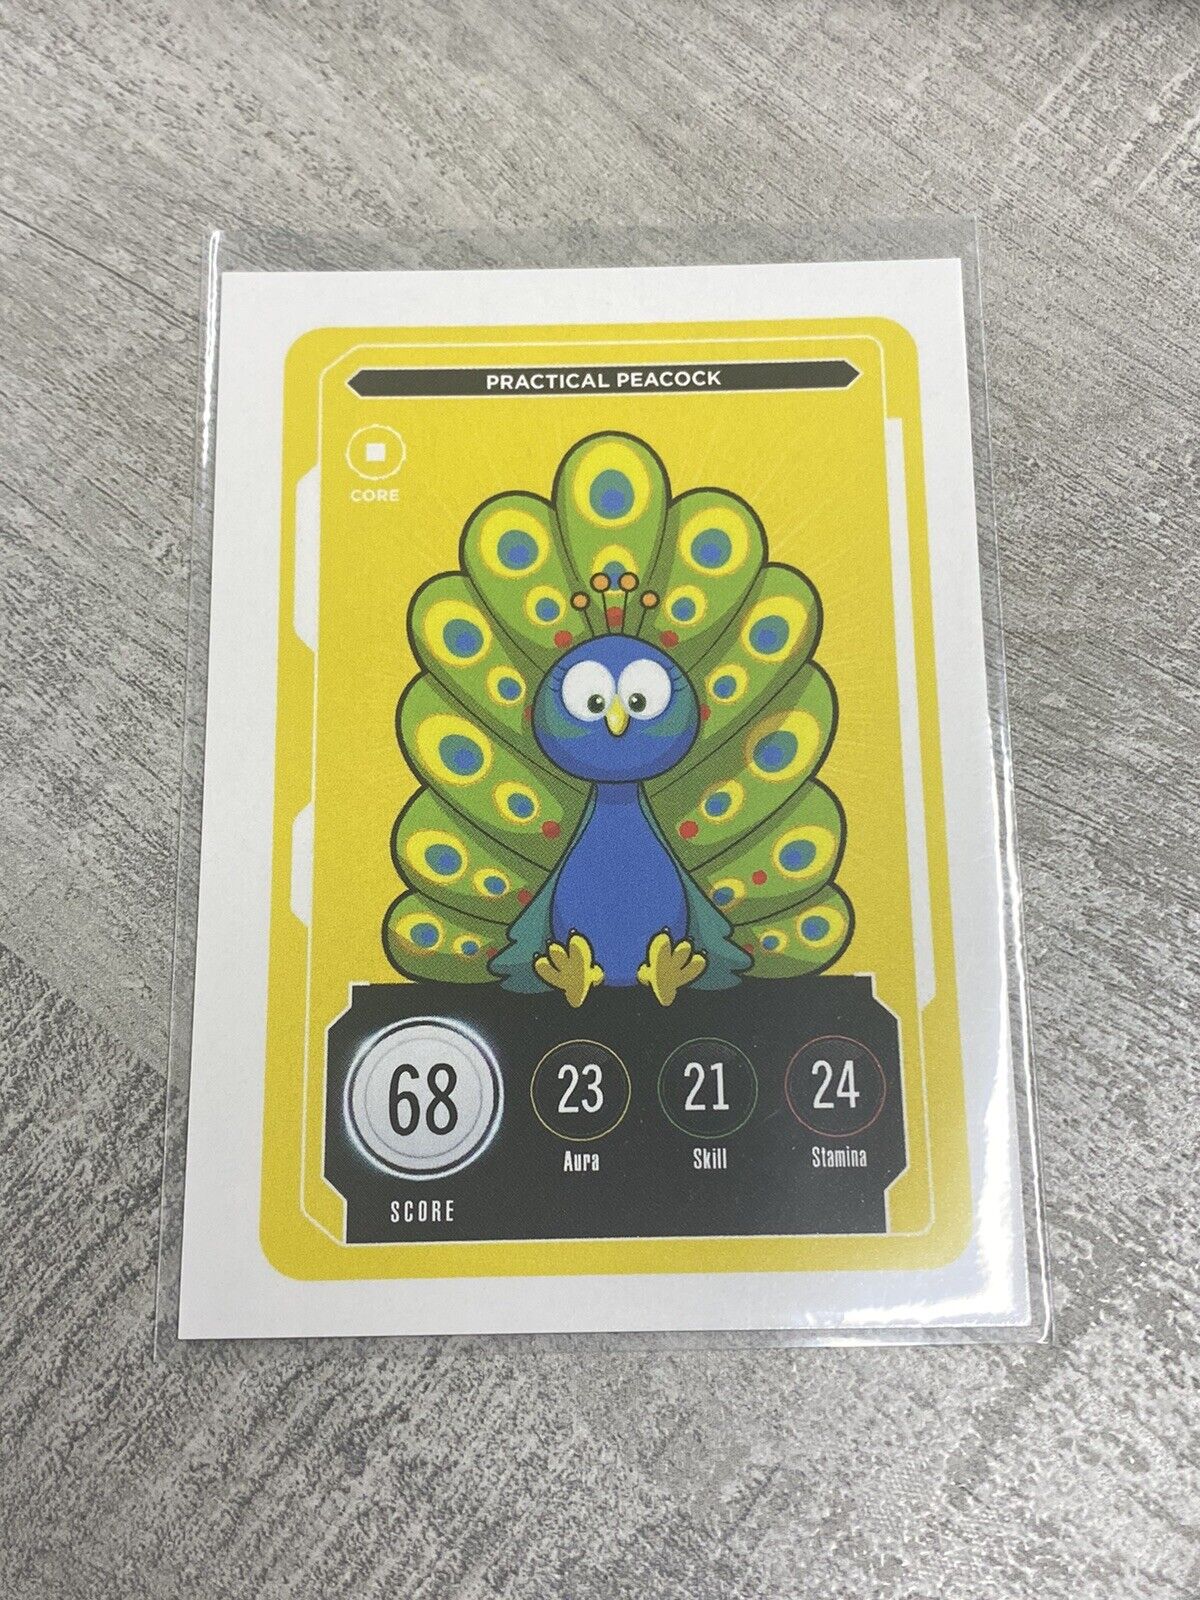 VeeFriends Series 2 Compete and Collect - Practical Peacock